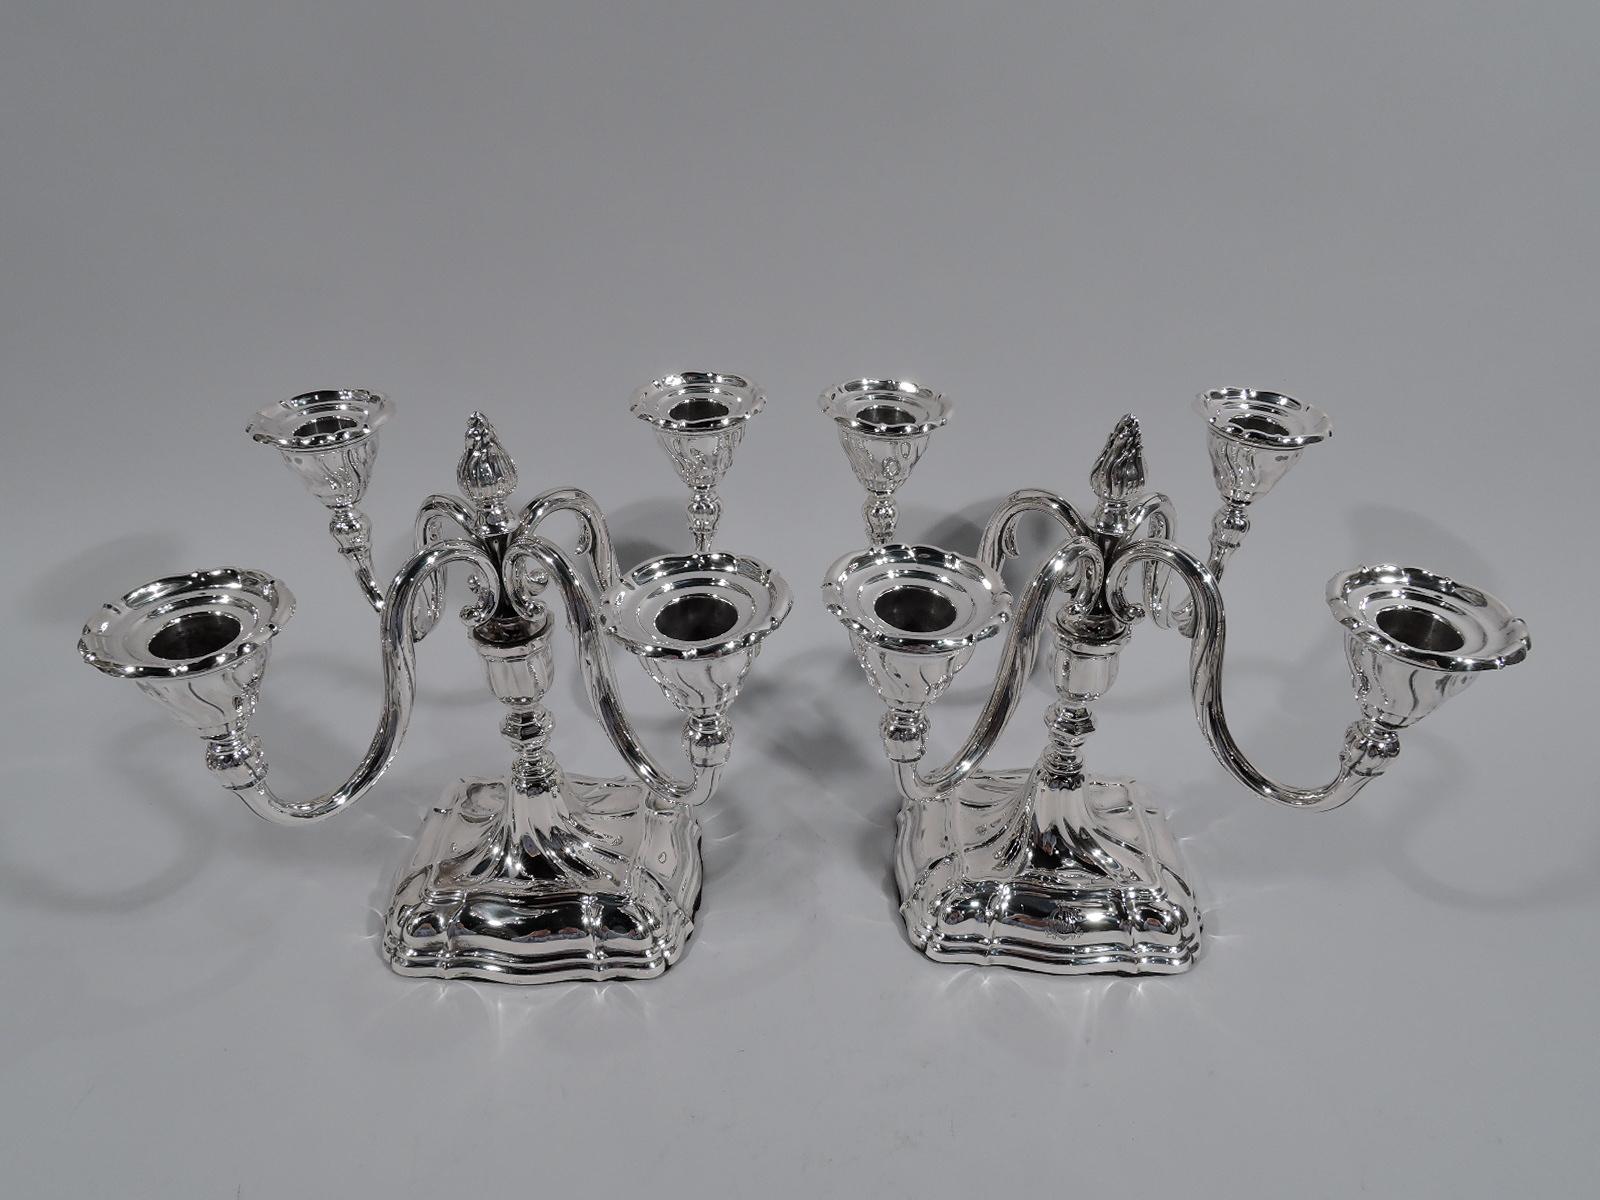 Pair of 4-light sterling silver candelabra, circa 1920. Each: Urn socket on baluster stem mounted to domed and rectangular base. Central bud finial on spool mounted with 4 -scroll arms, each terminating in single socket. Dynamic twisting and